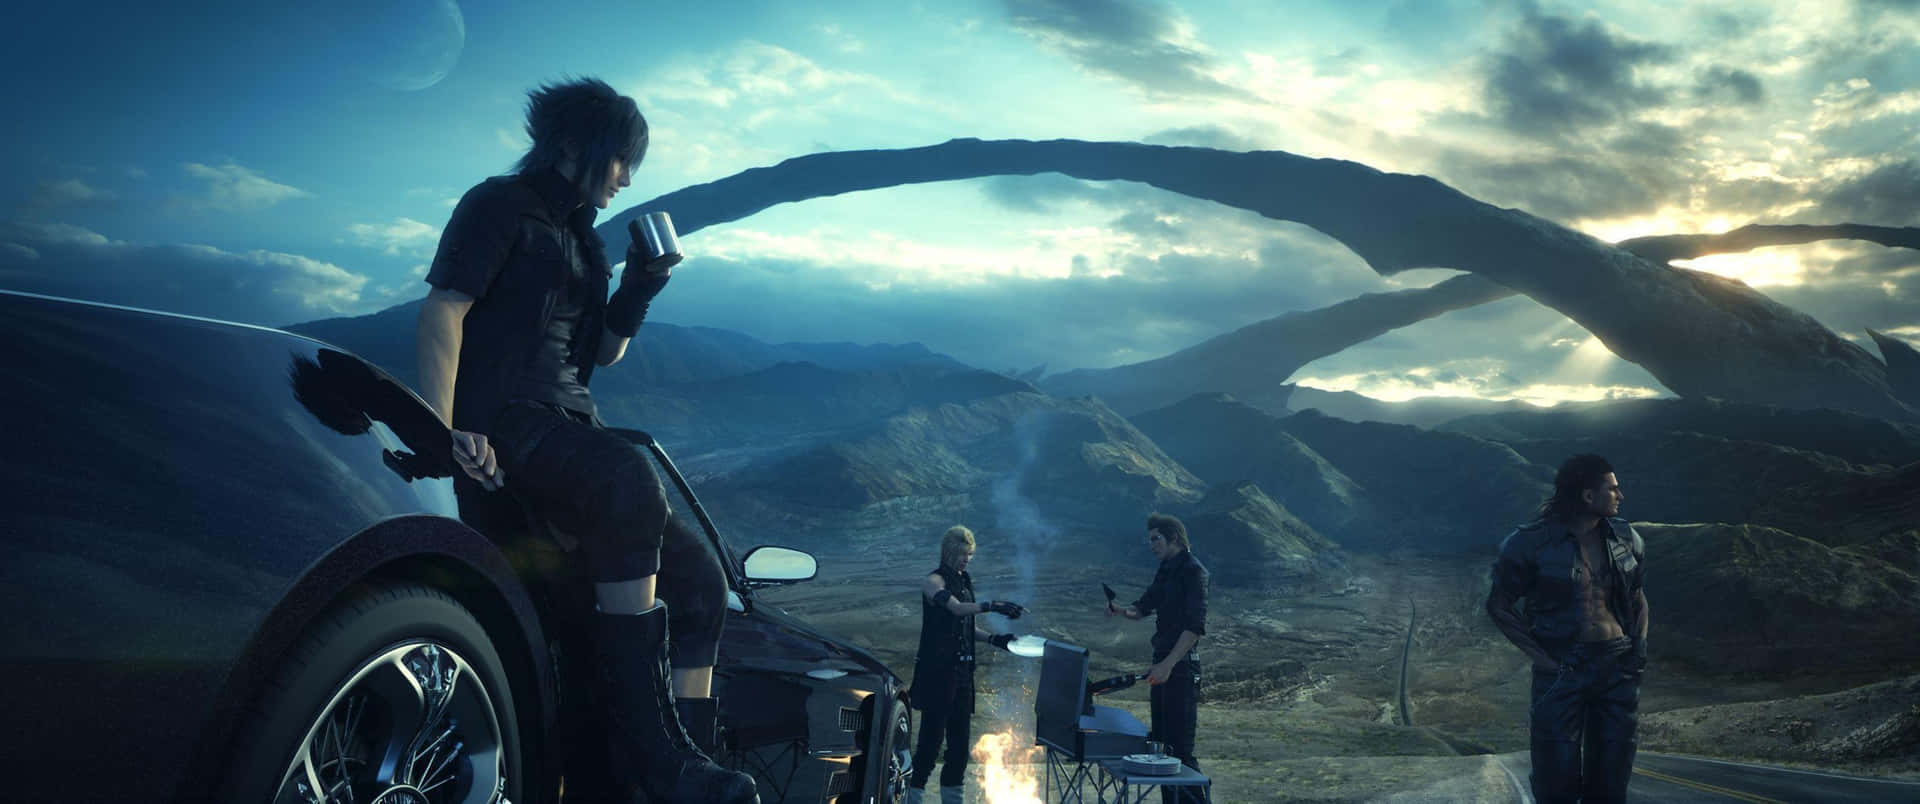 Enjoy the View with Final Fantasy Xv